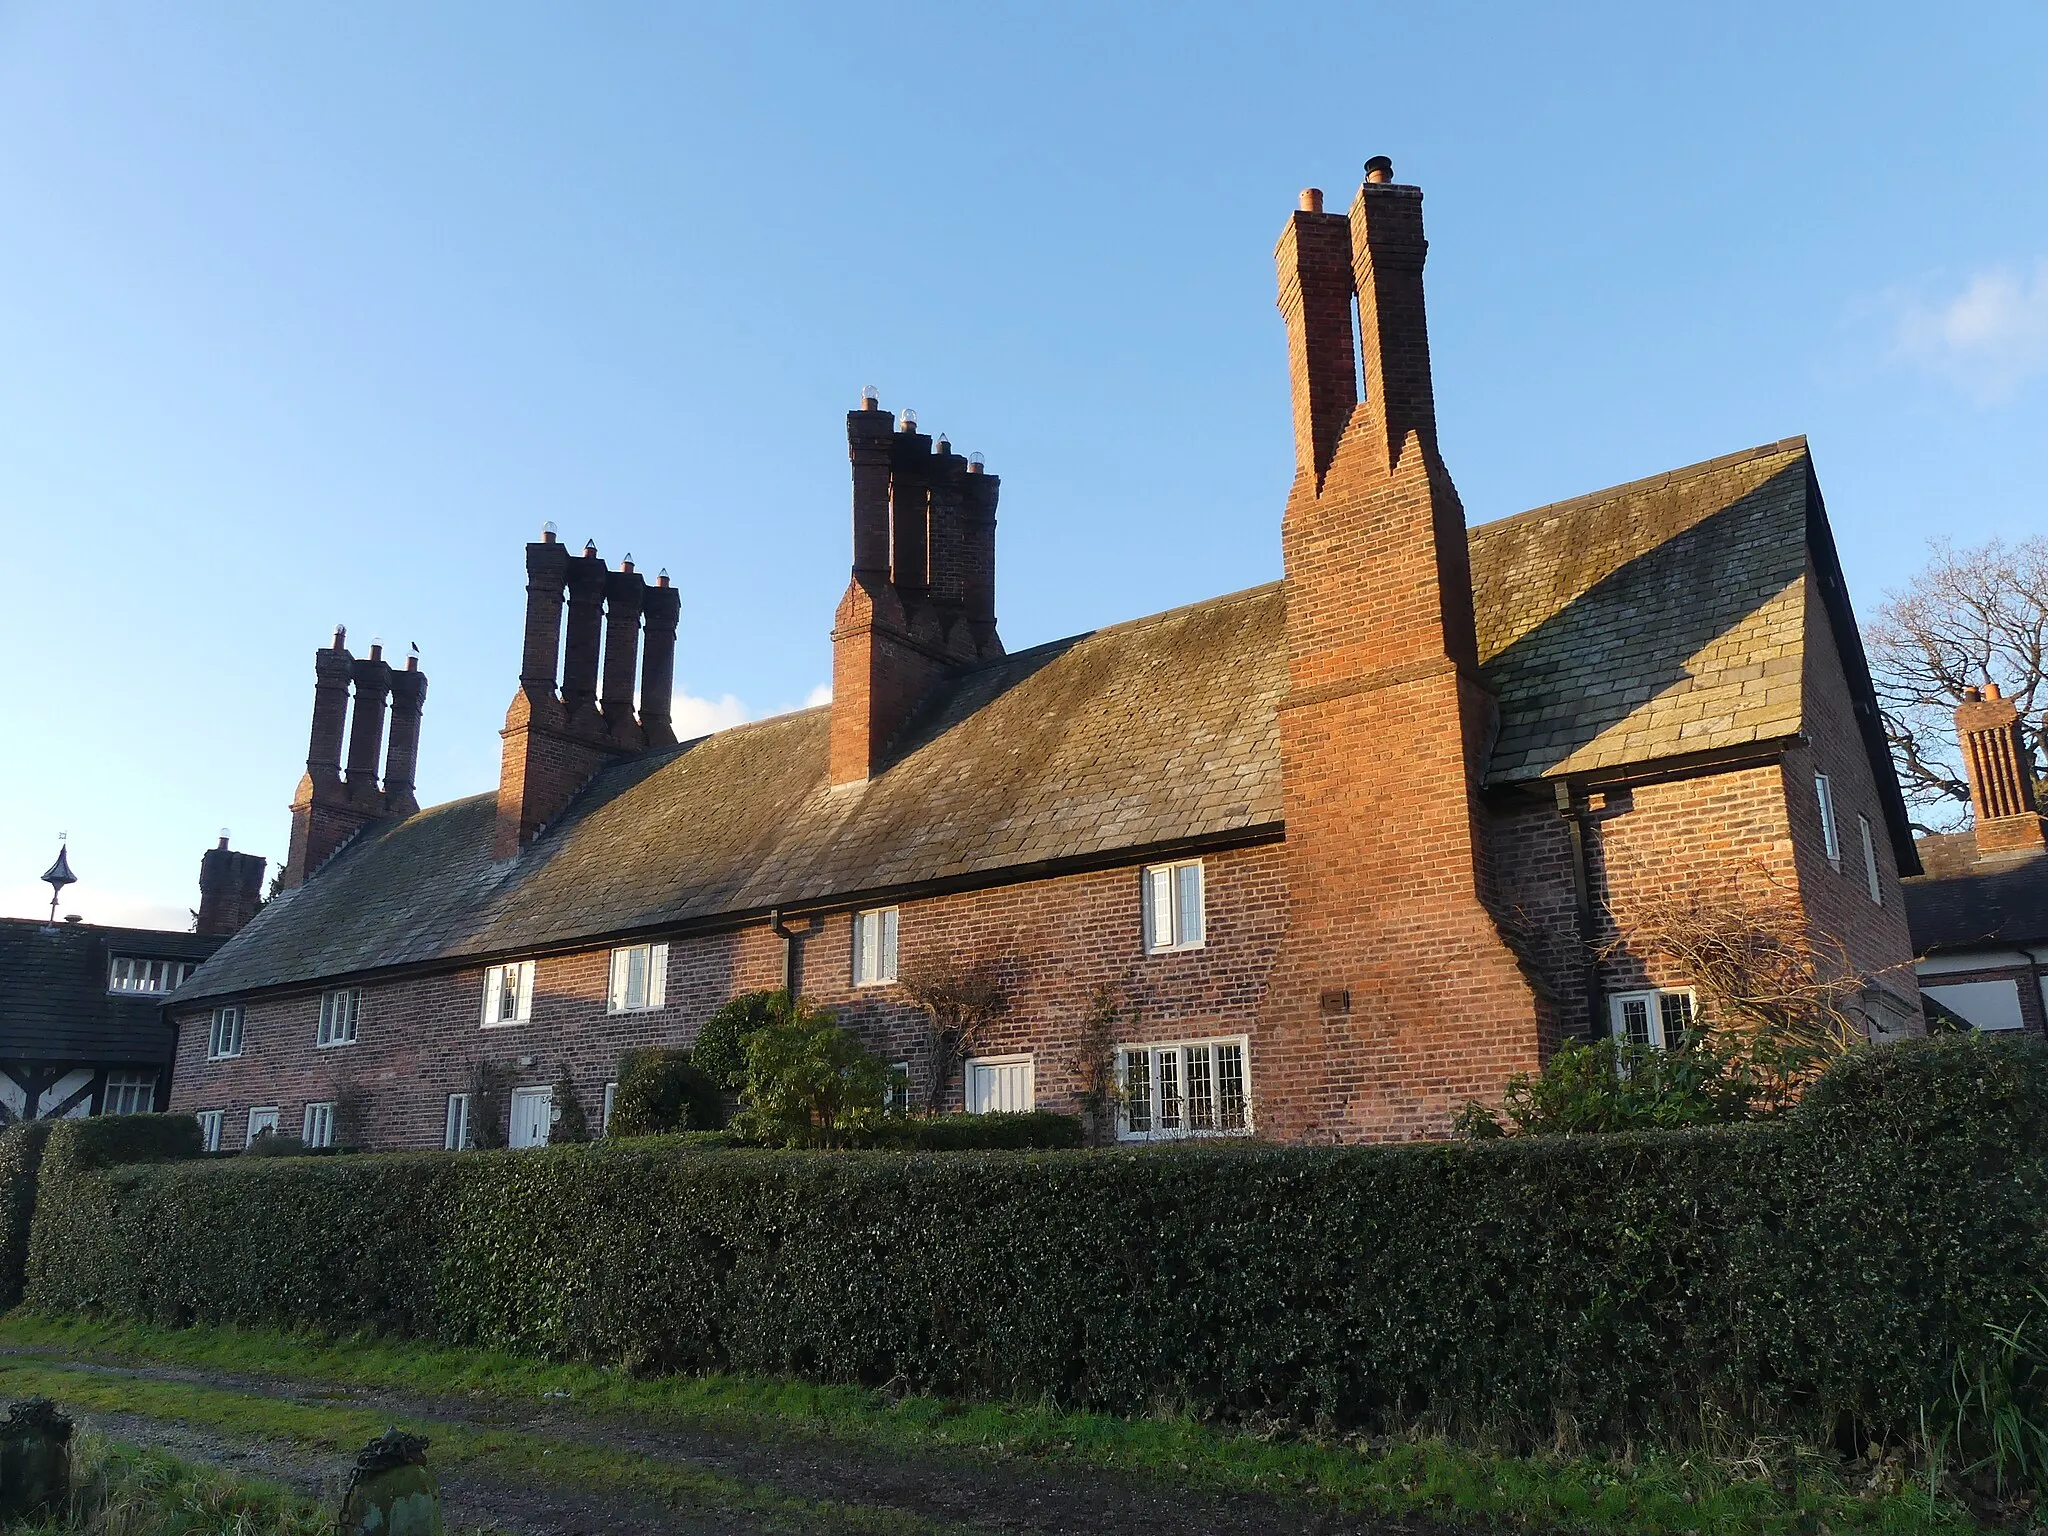 Photo showing: Grade II listed row of cottages at Arley Green, Cheshire. Listed as "King's Cottage, Chaplains House, School House and Oak Lodge". Wikidata has entry King's Cottage, Chaplains House, School House and Oak Lodge (Q26432387) with data related to this item.